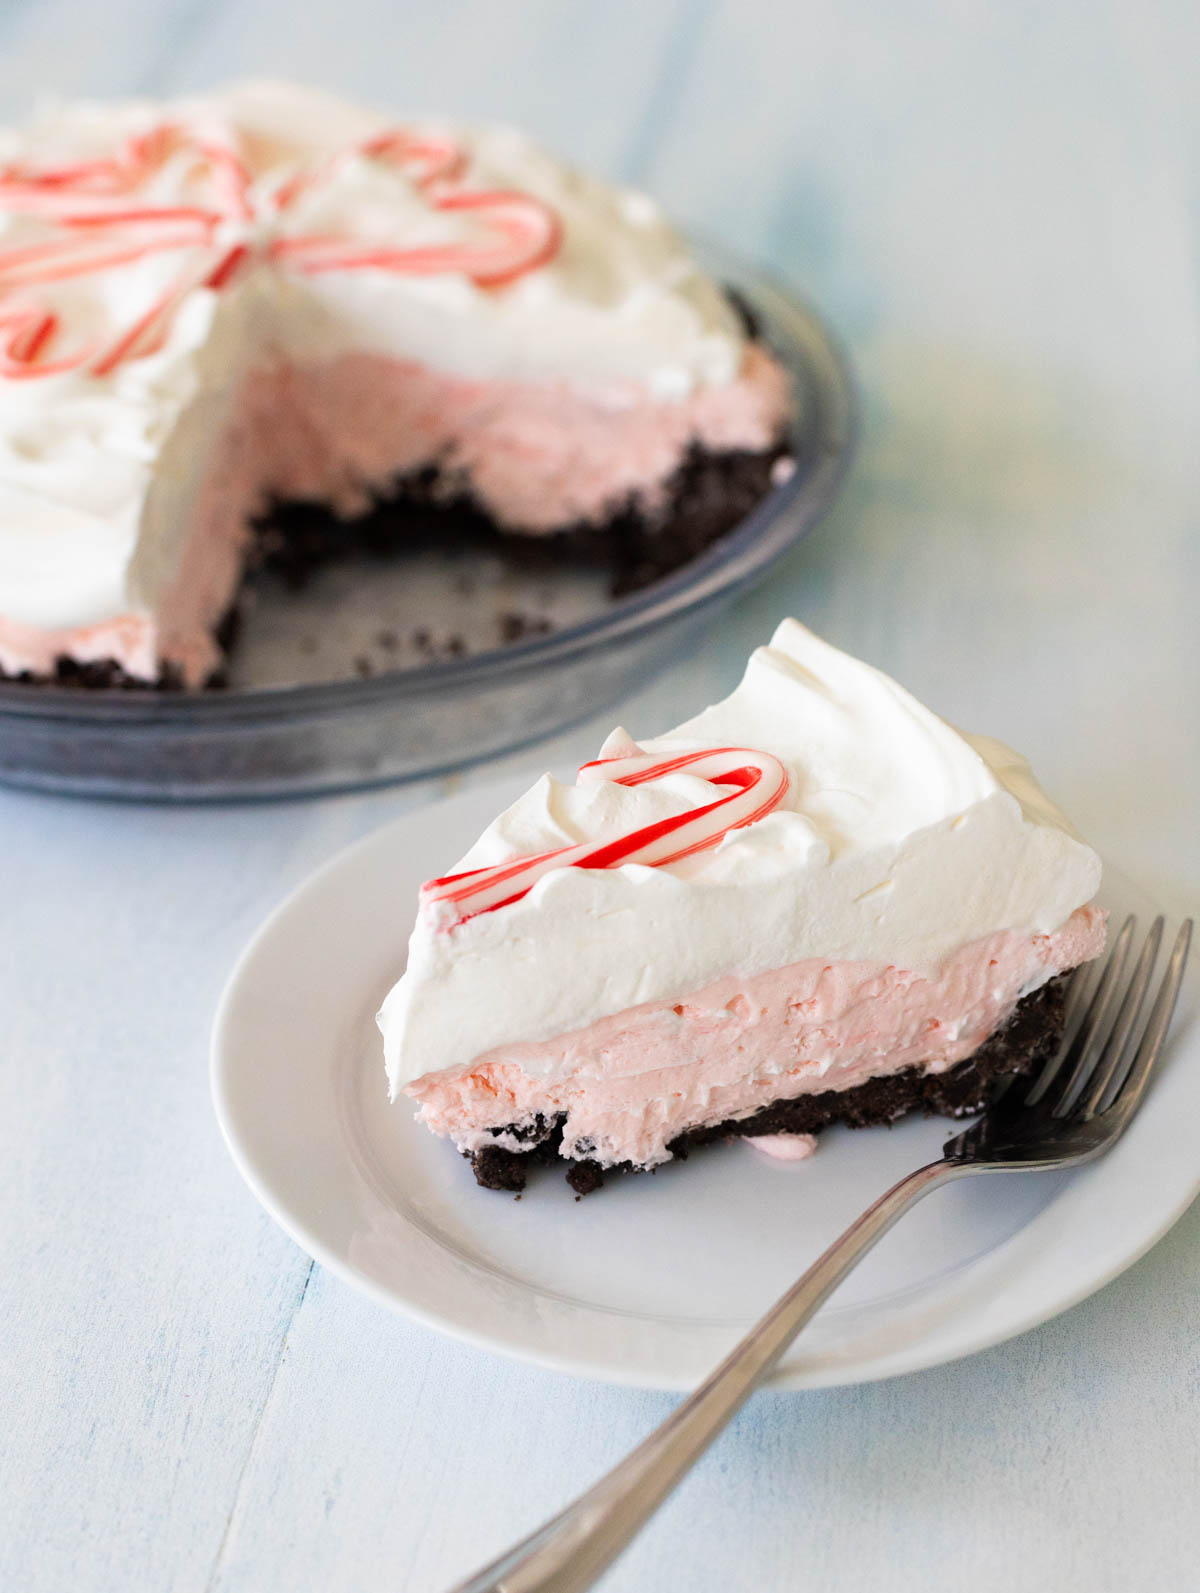 A slice of the candy cane pie is on a white plate with a fork so you can see the layers of creamy filling. The sliced pie is in the background.